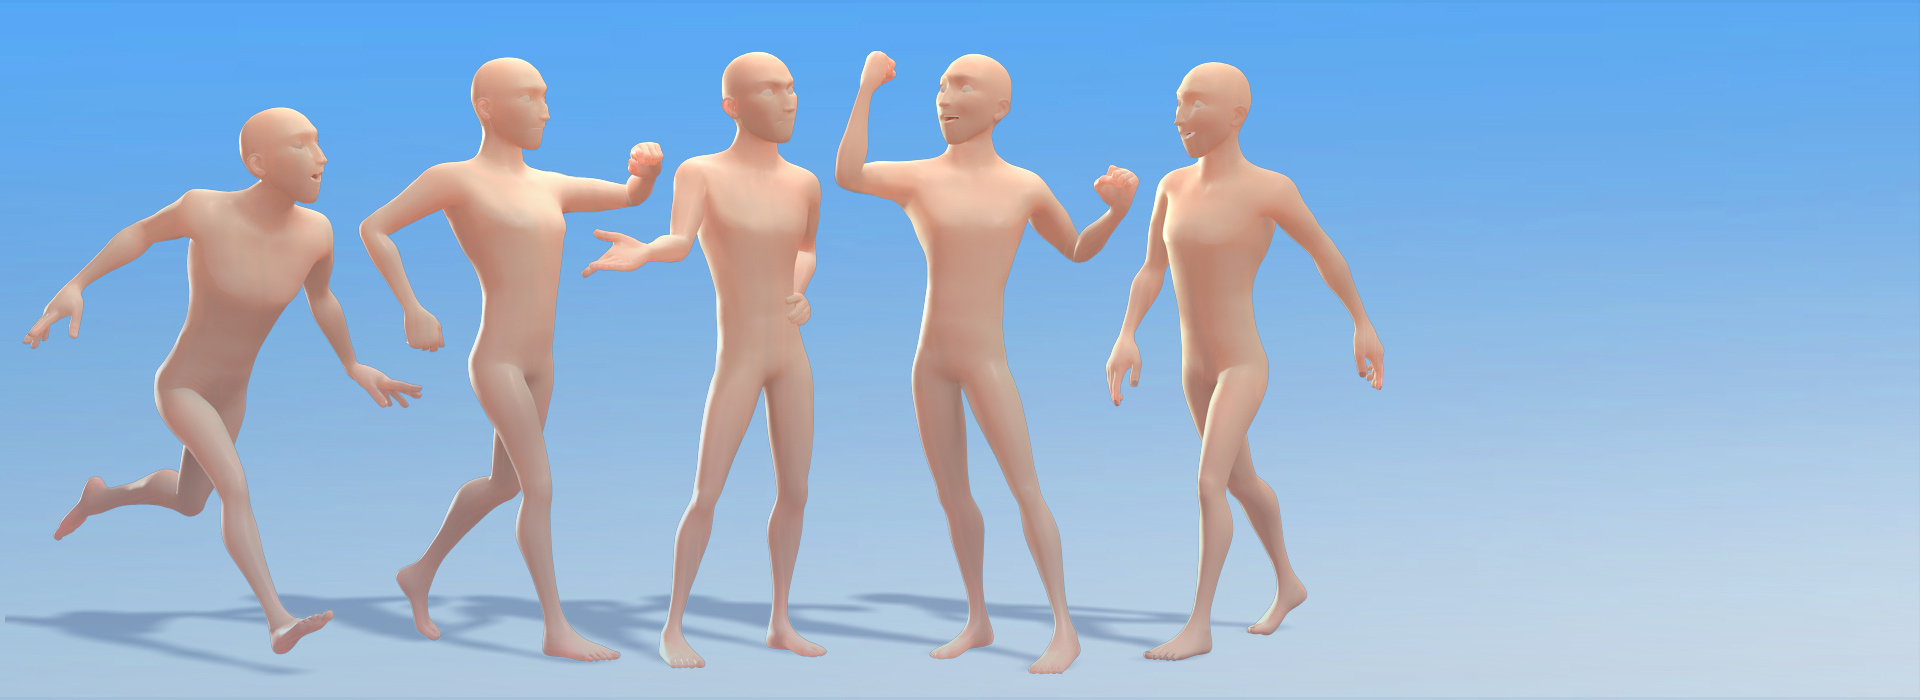 classical cartoon motion-act and move for male